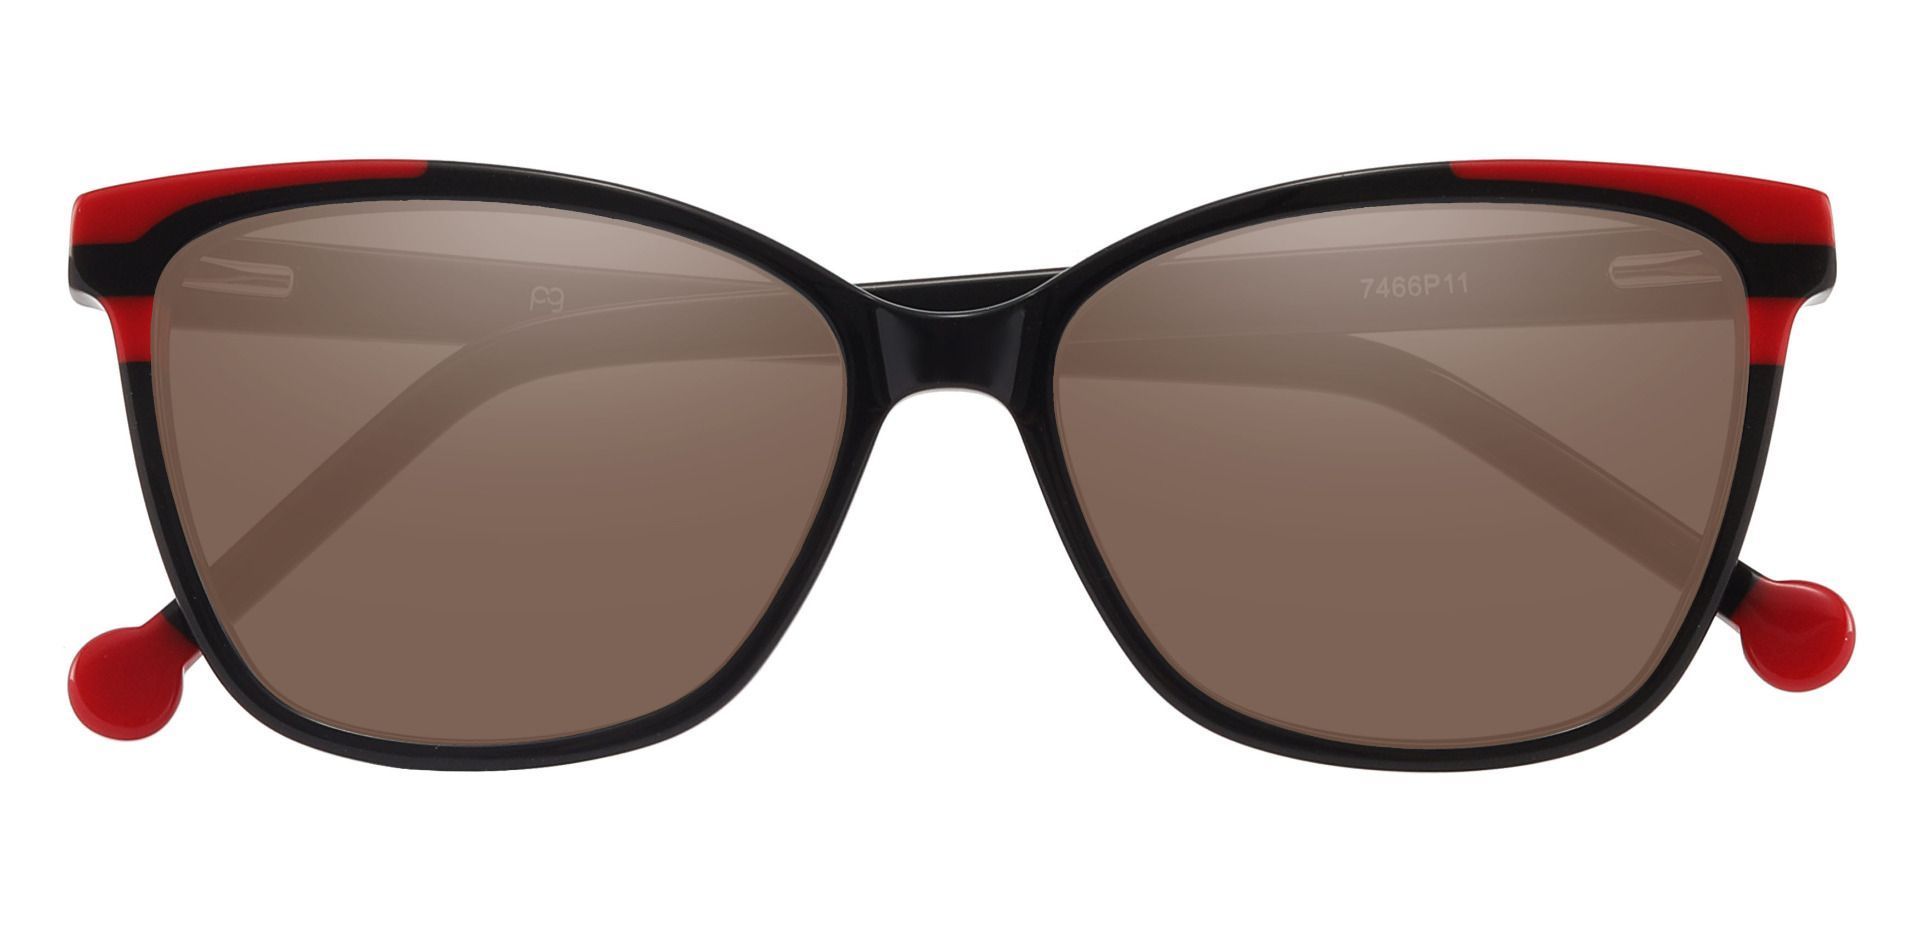 Shania Cat Eye Lined Bifocal Sunglasses - Black Frame With Brown Lenses